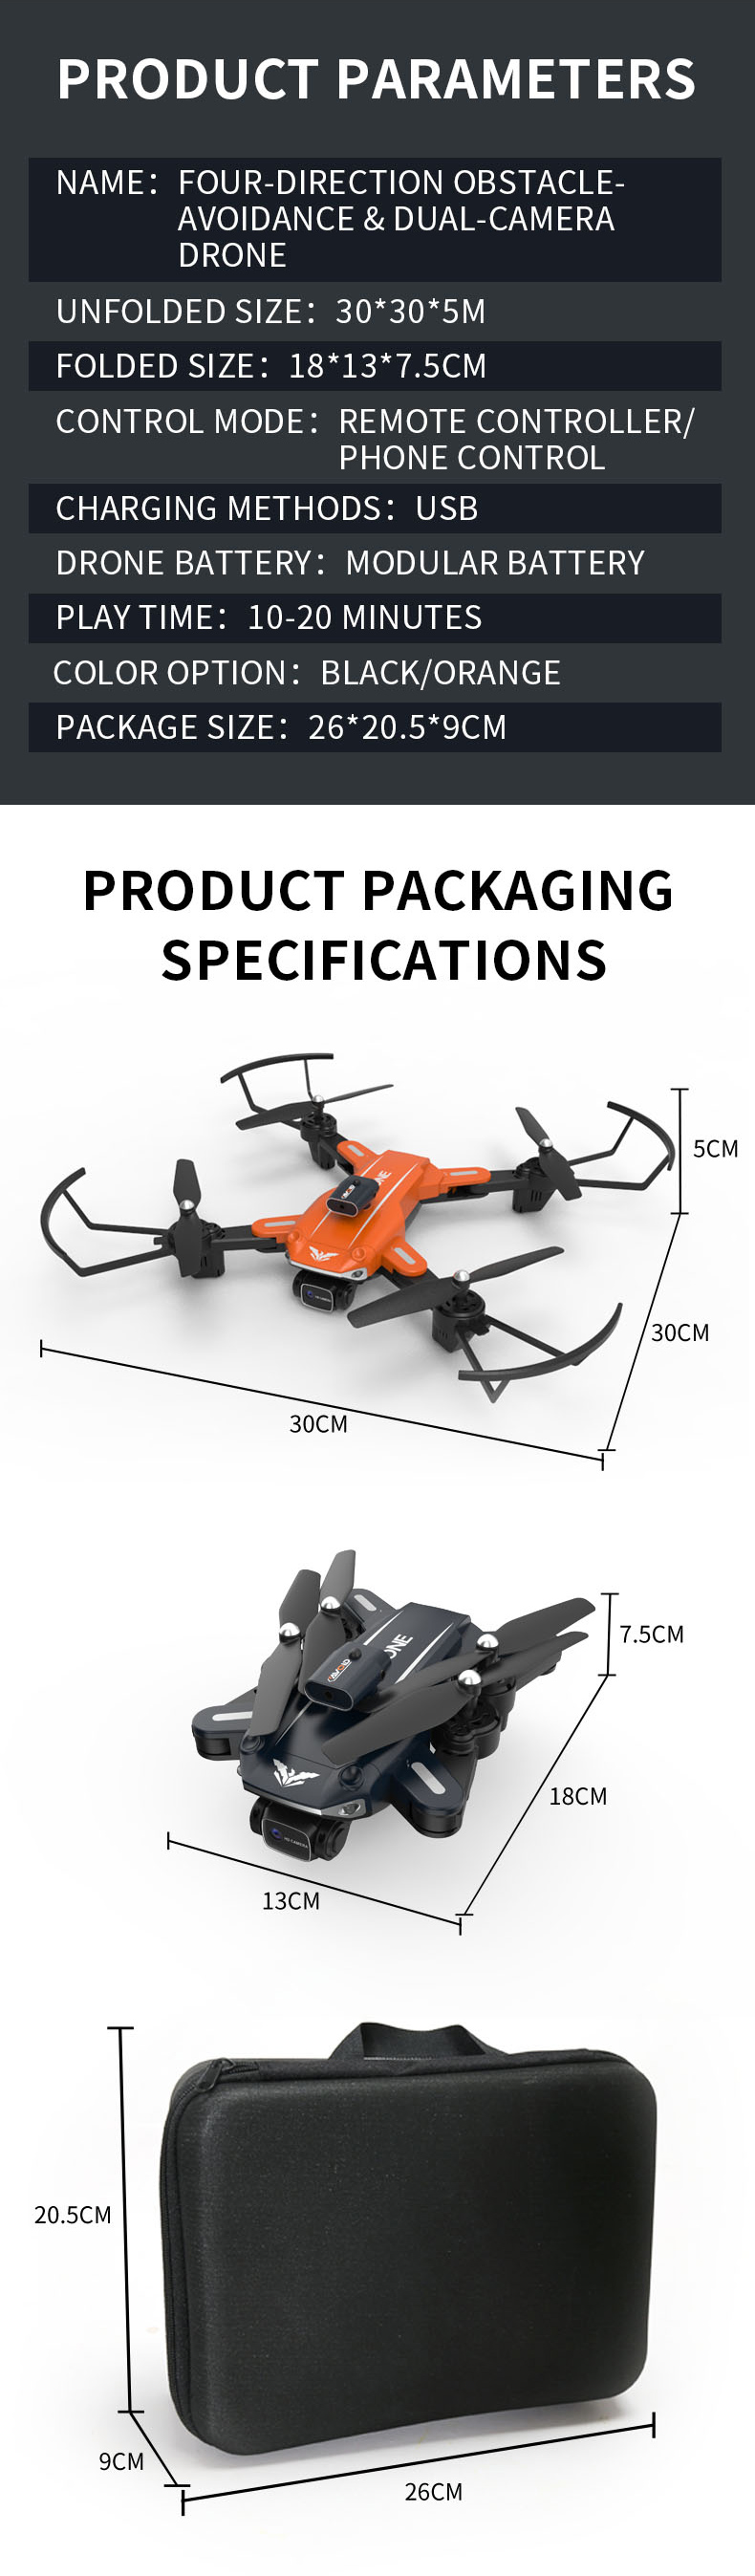 JJRC H109 Bat Rider Four-Direction Obstacle-Avoidance&Dual-Camera Drone